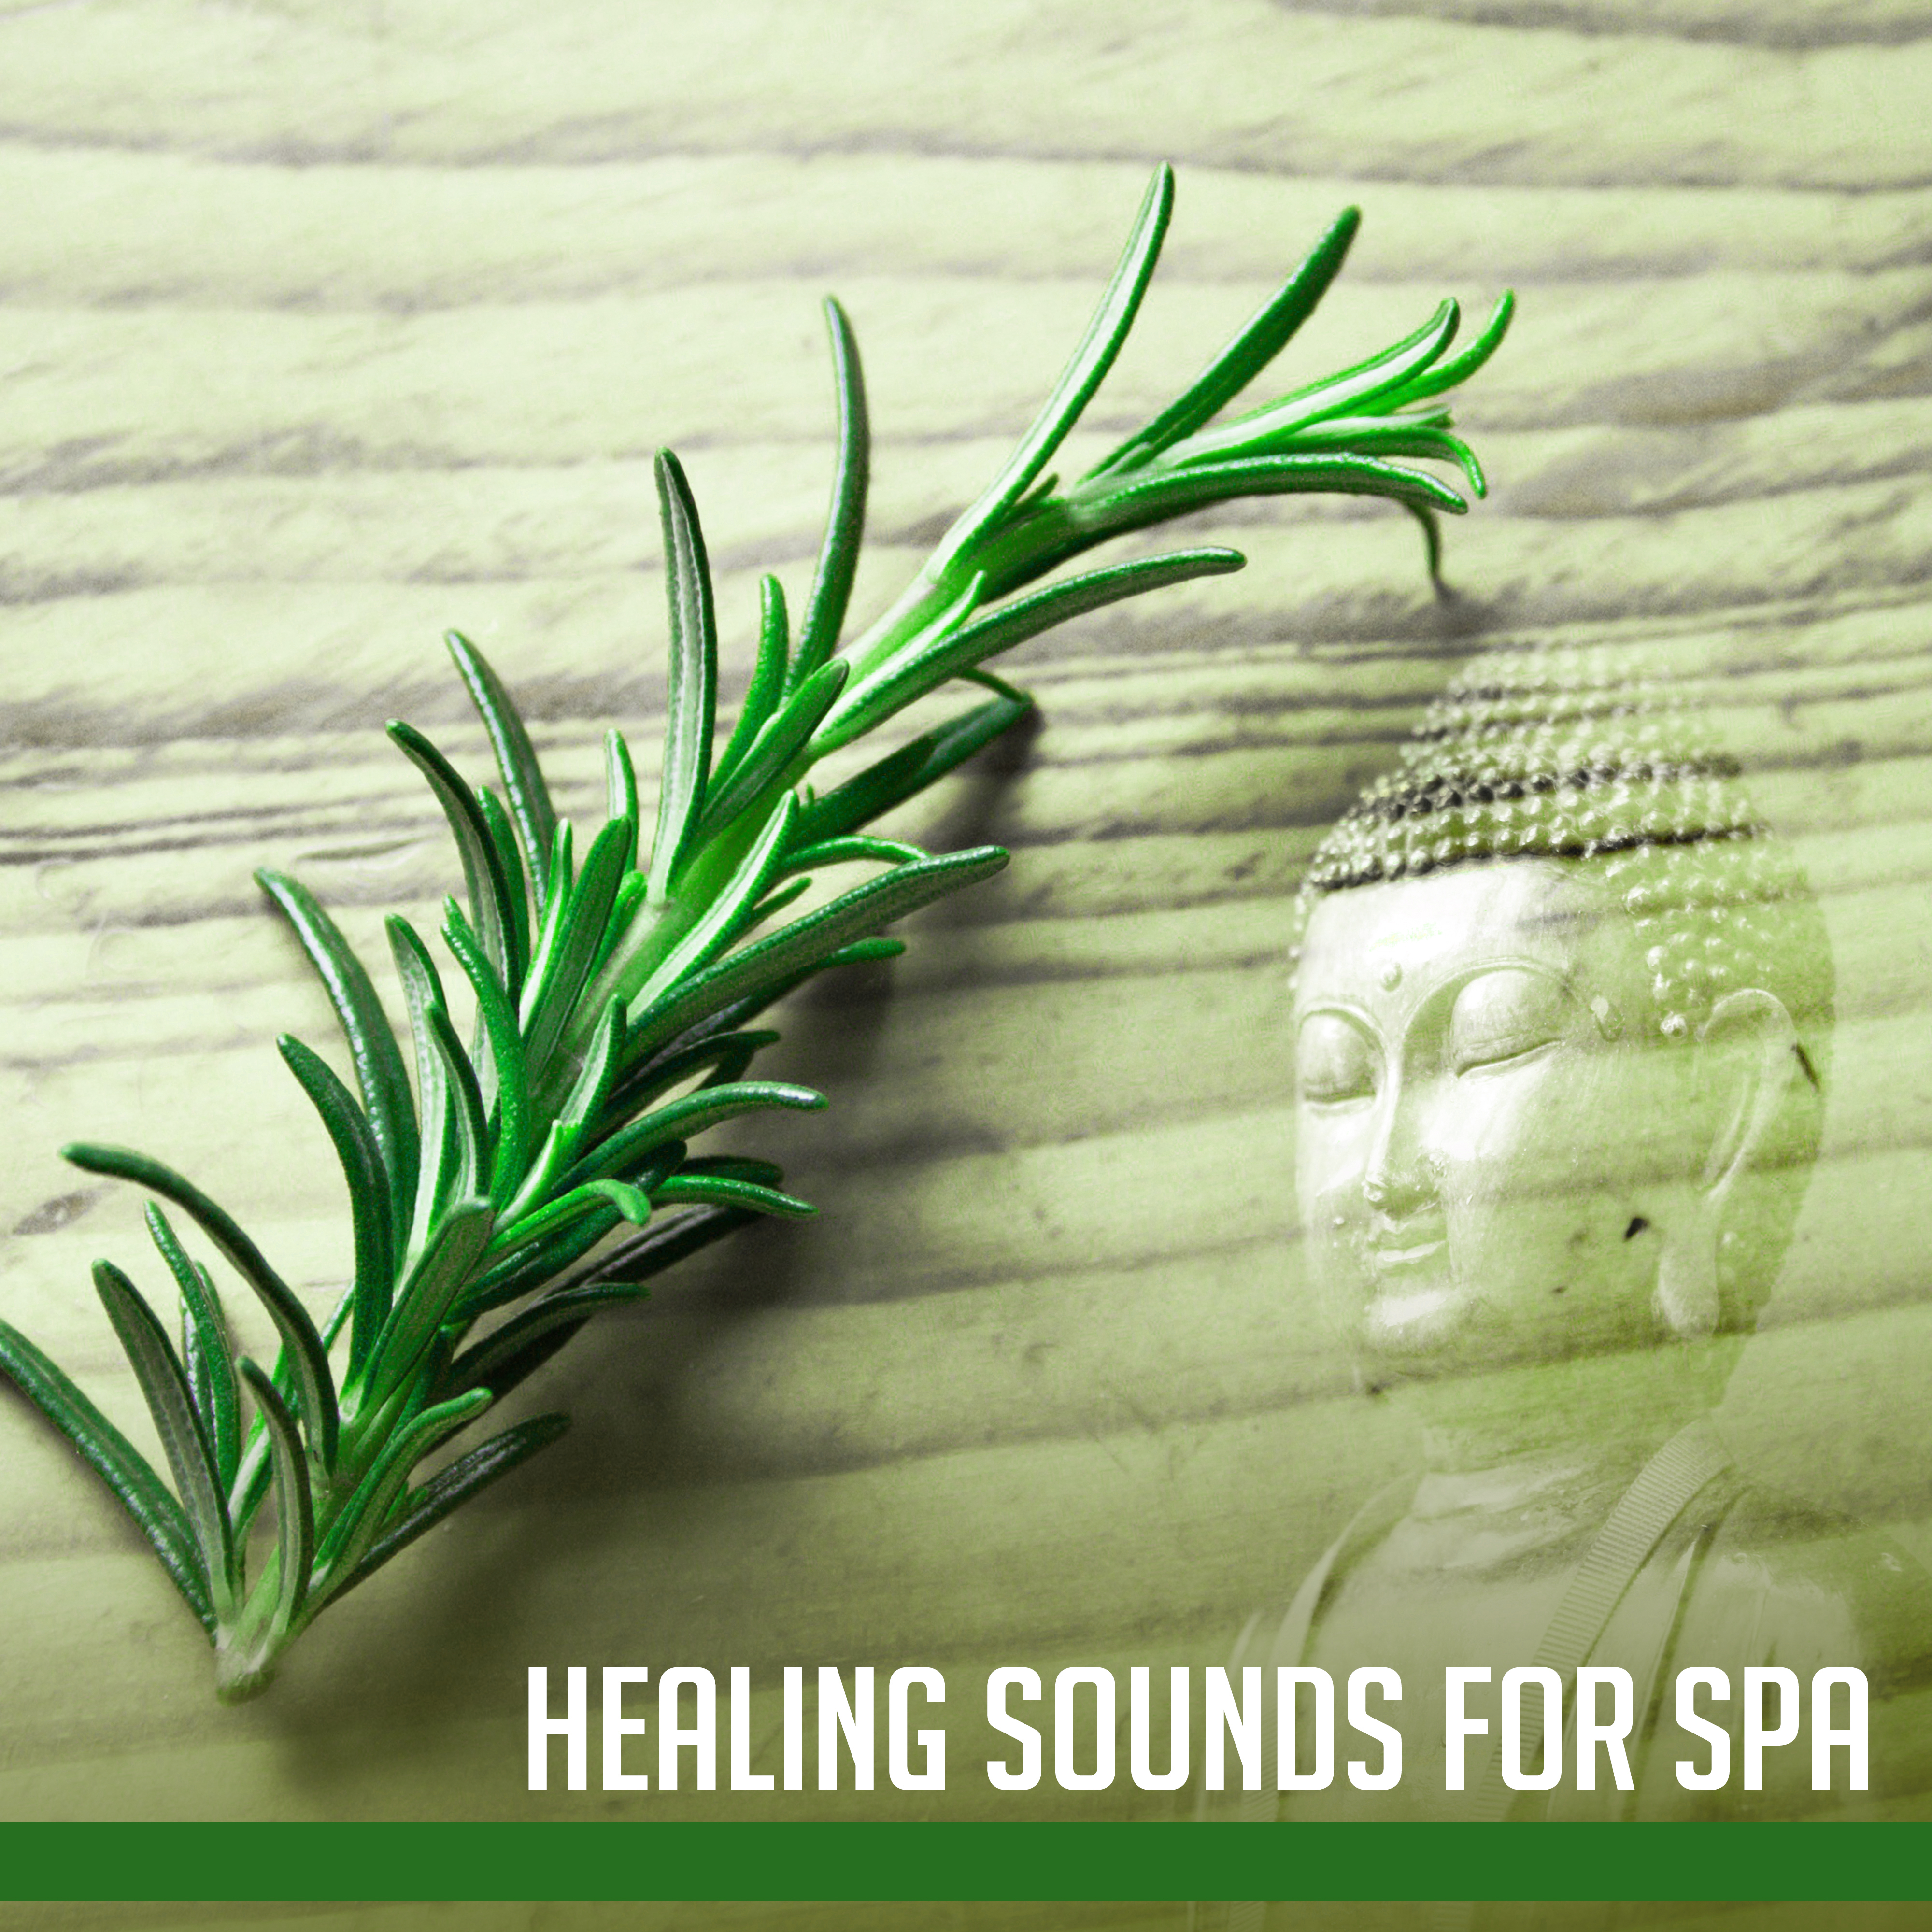 Healing Sounds for Spa  Relaxation Wellness, Calming Melodies, Pure Massage, Deep Relief, Oriental Flute, Spa Music, Soothing Nature Sounds